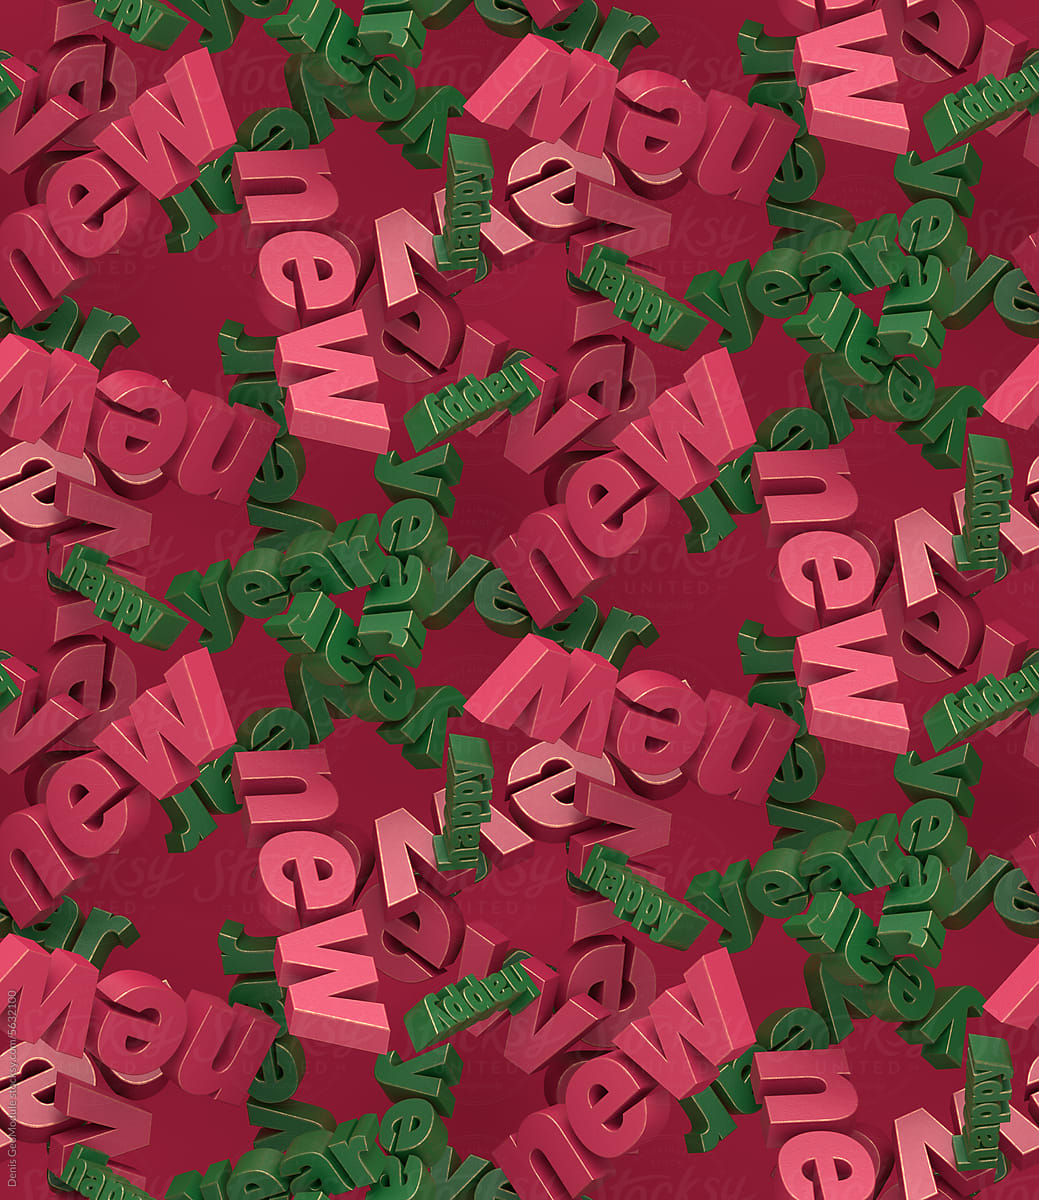 Wallpaper art of red and green words 